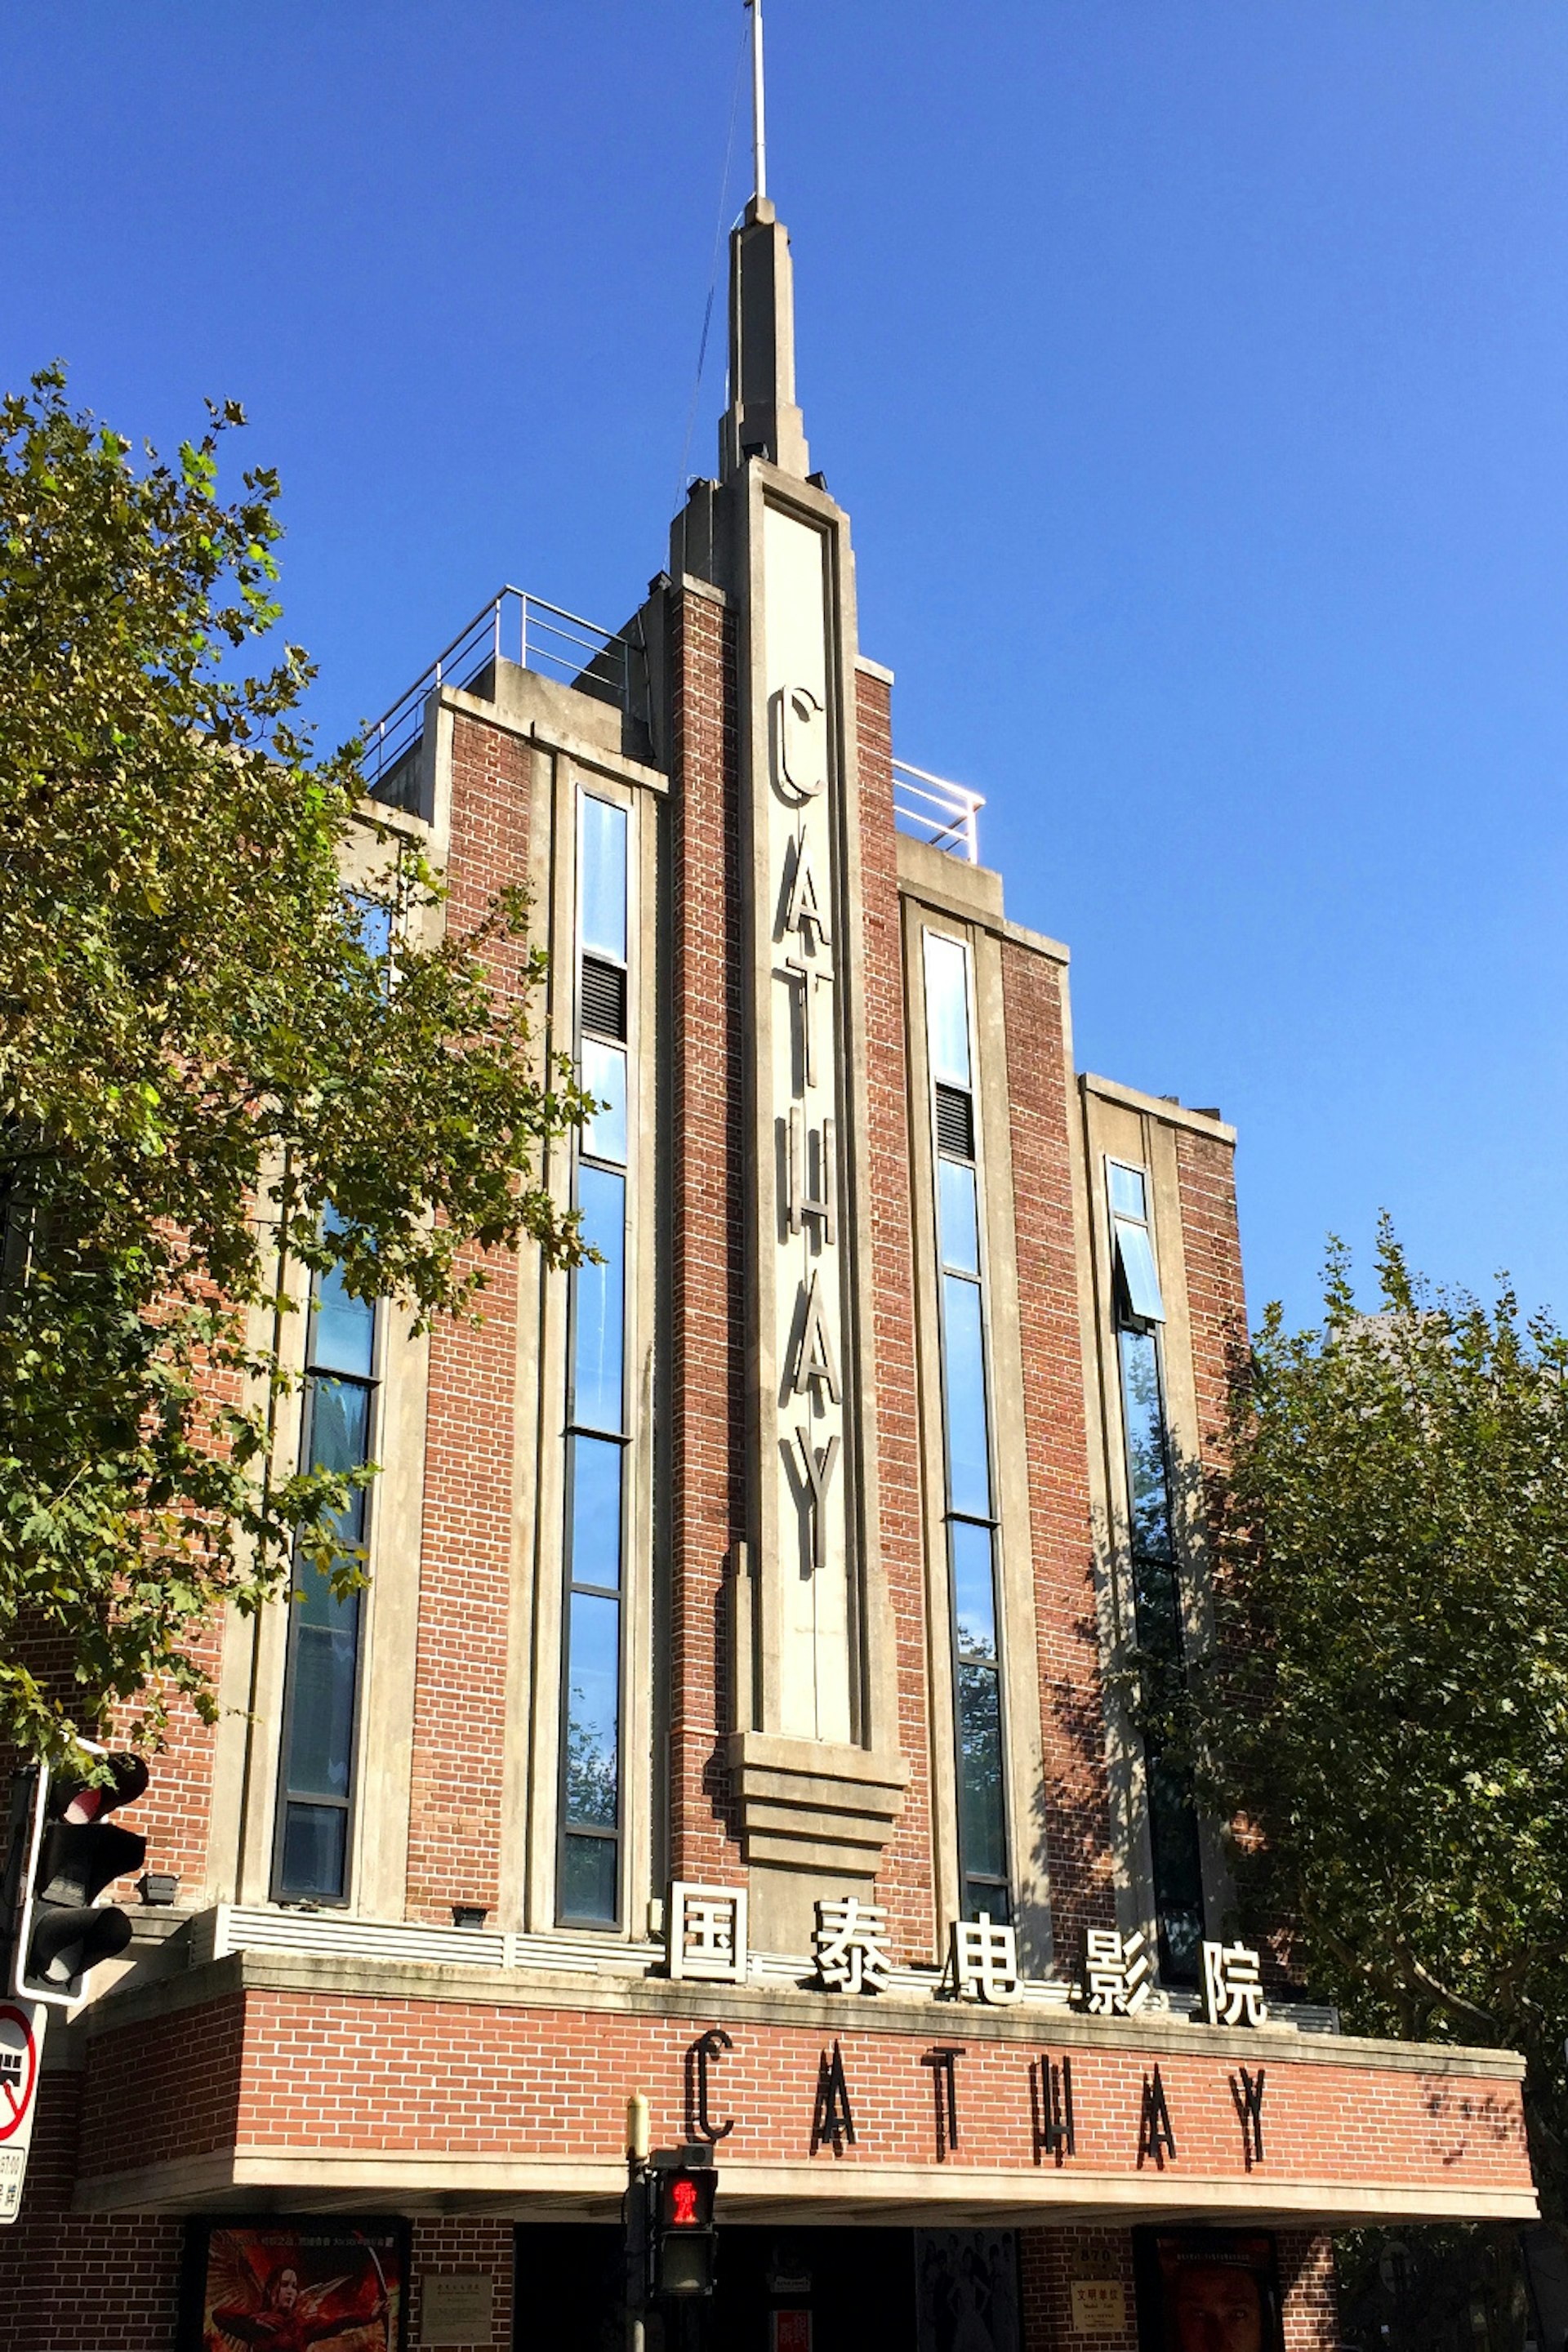 The Cathay Theatre's gorgeous art deco façade © Juliana Loh / Lonely Planet